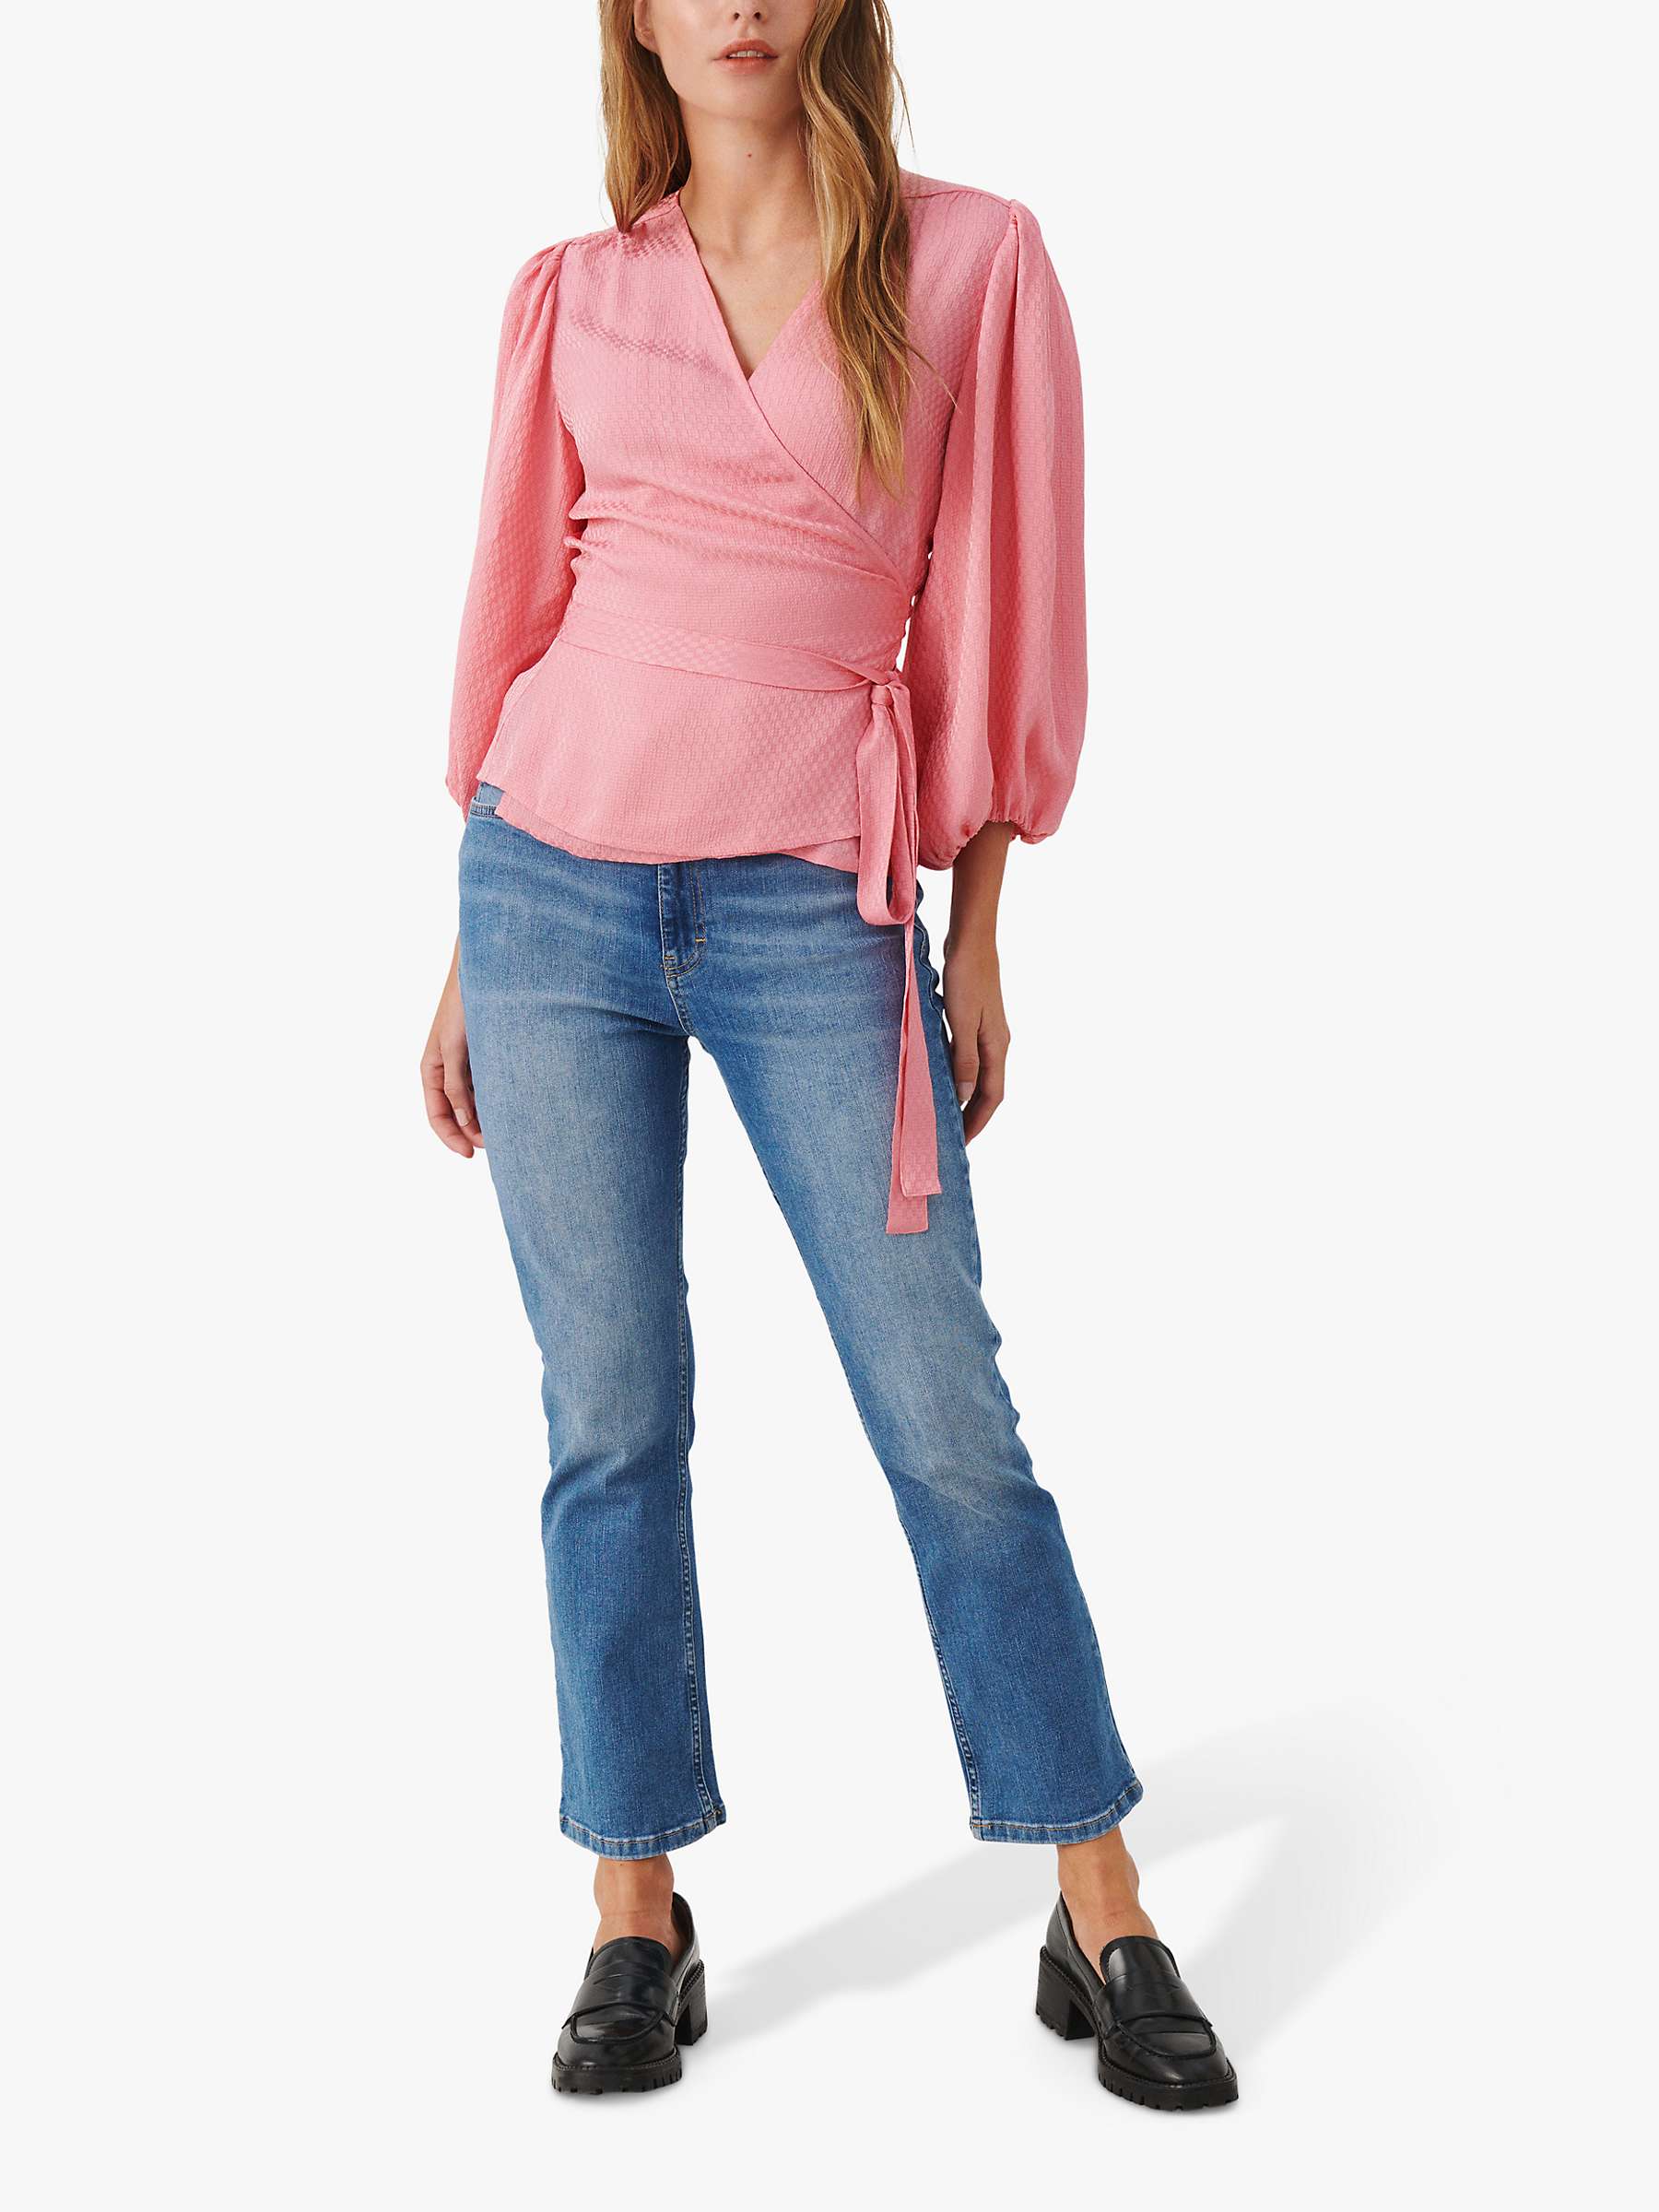 Buy Part Two Tova Wrap Blouse Online at johnlewis.com